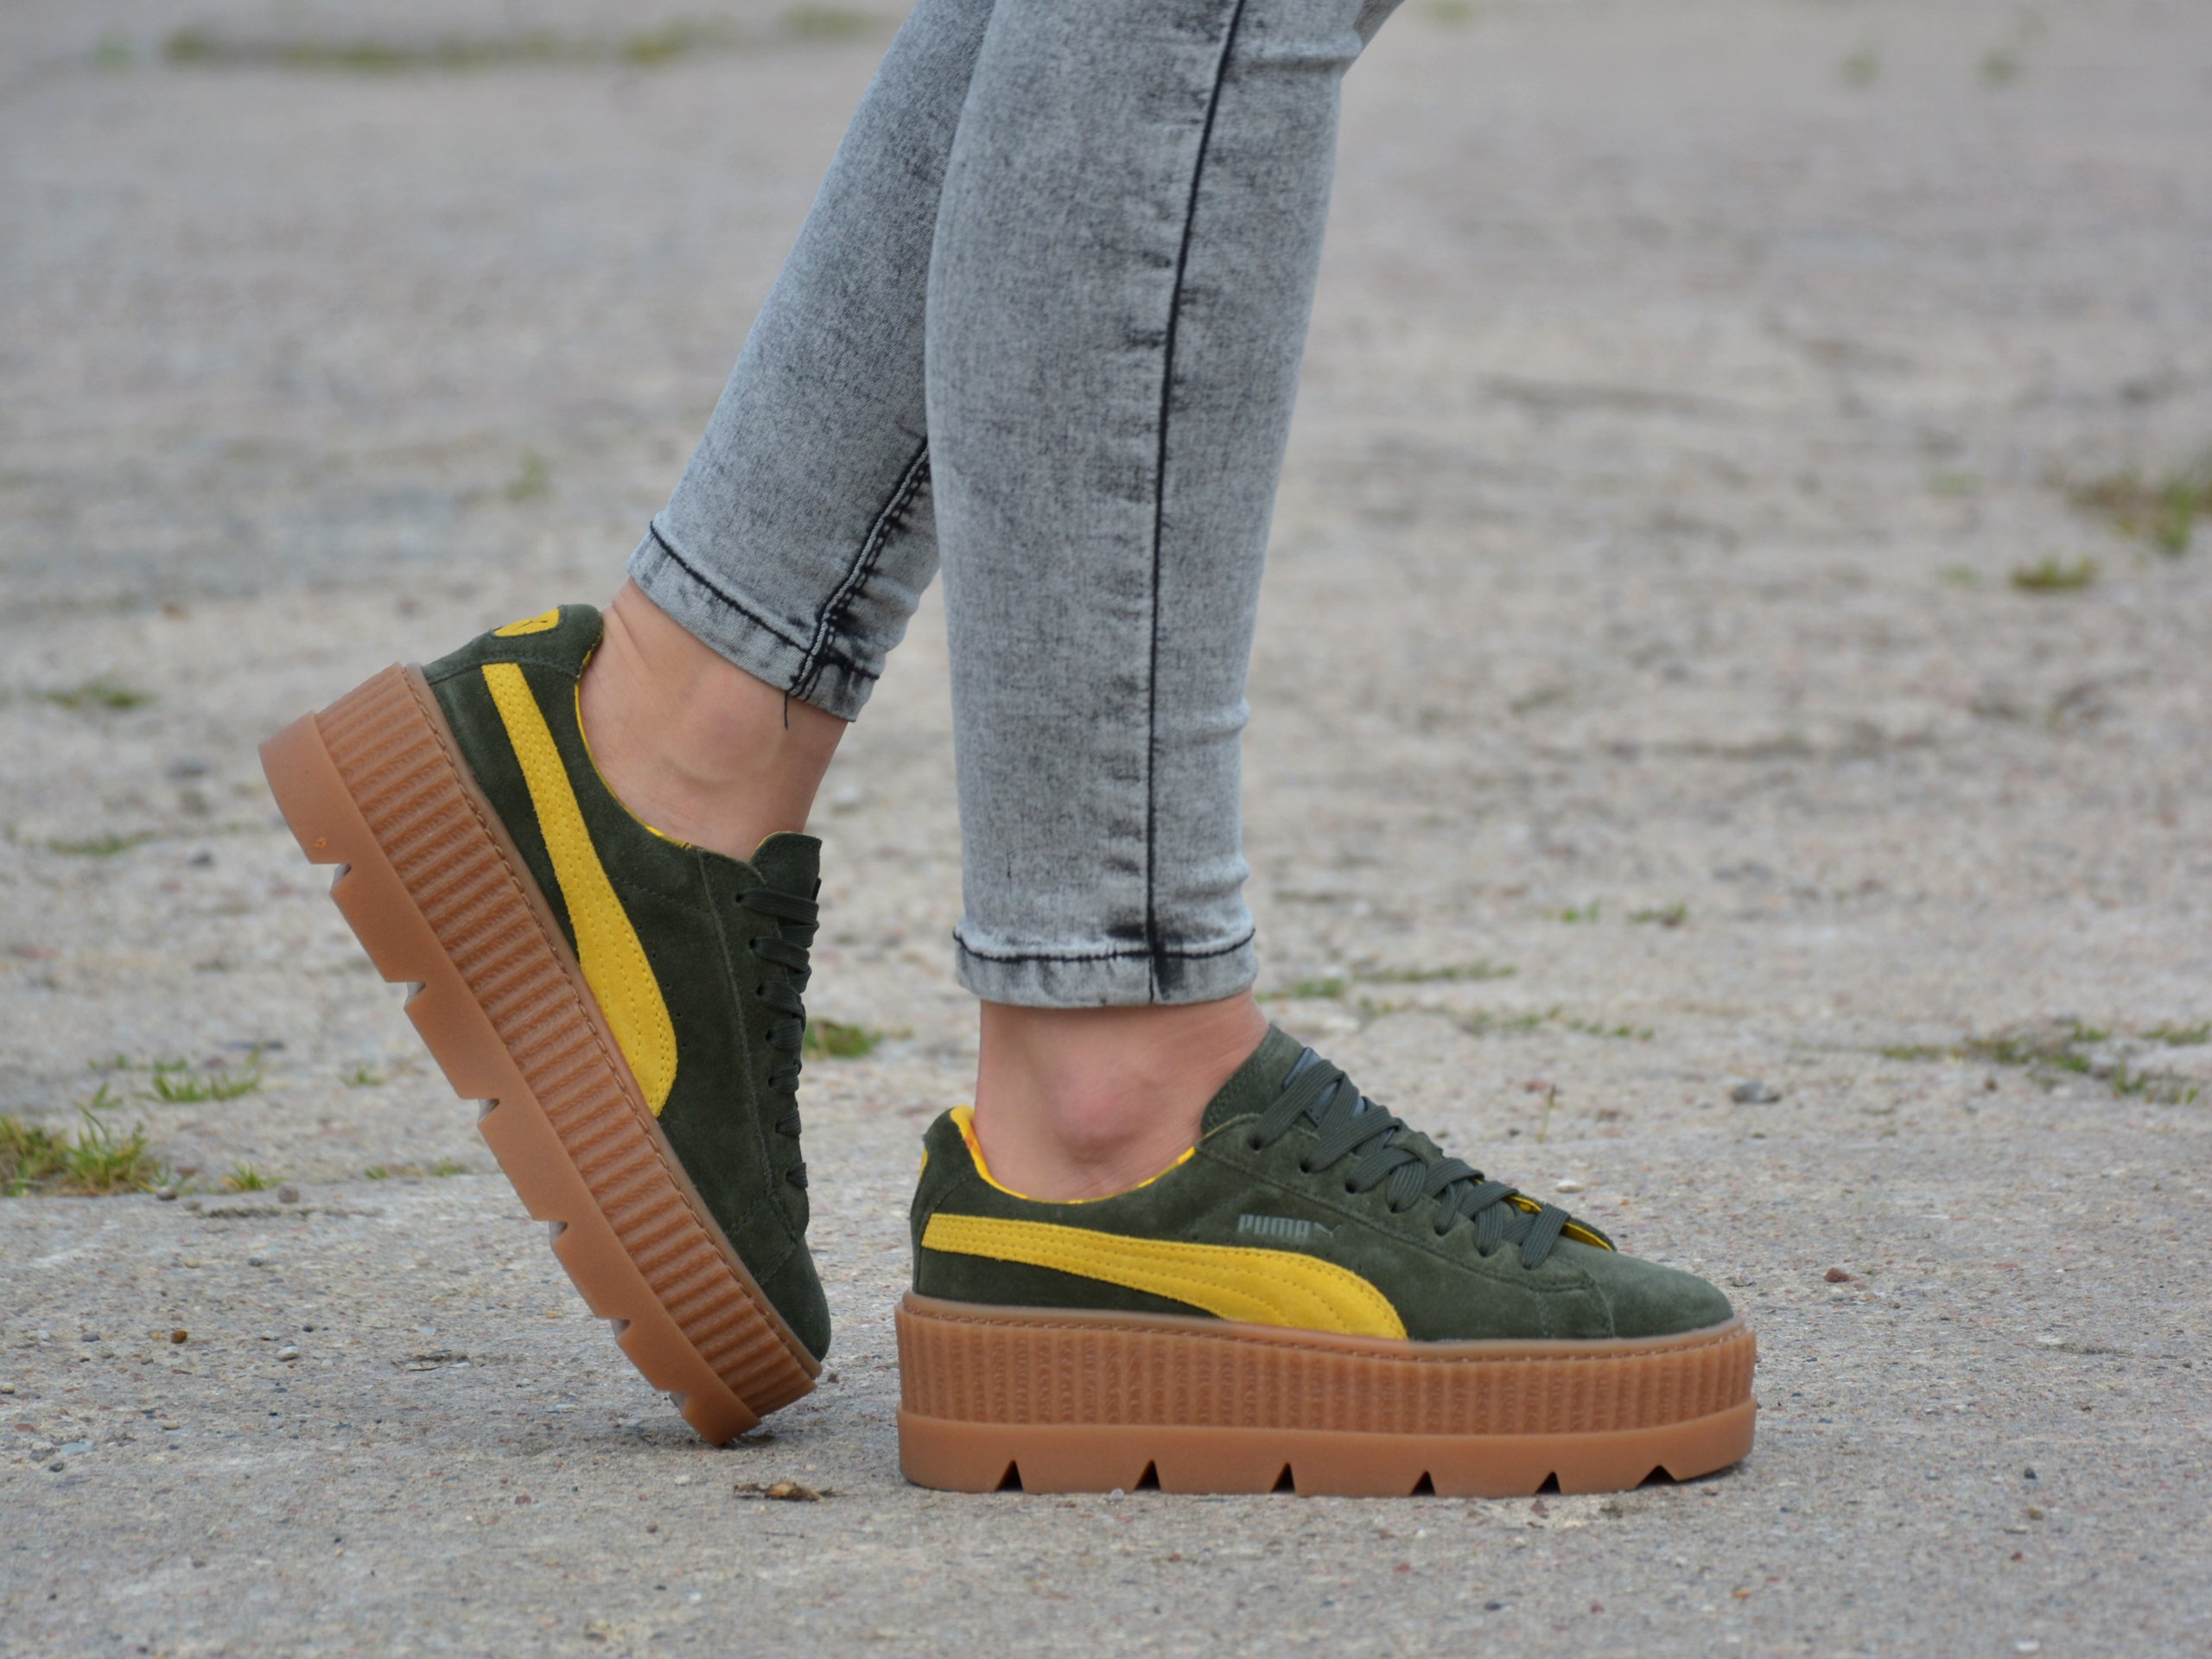 Puma - Cleated Creeper Suede WN'S 366268-01 - Sneakers - Yellow